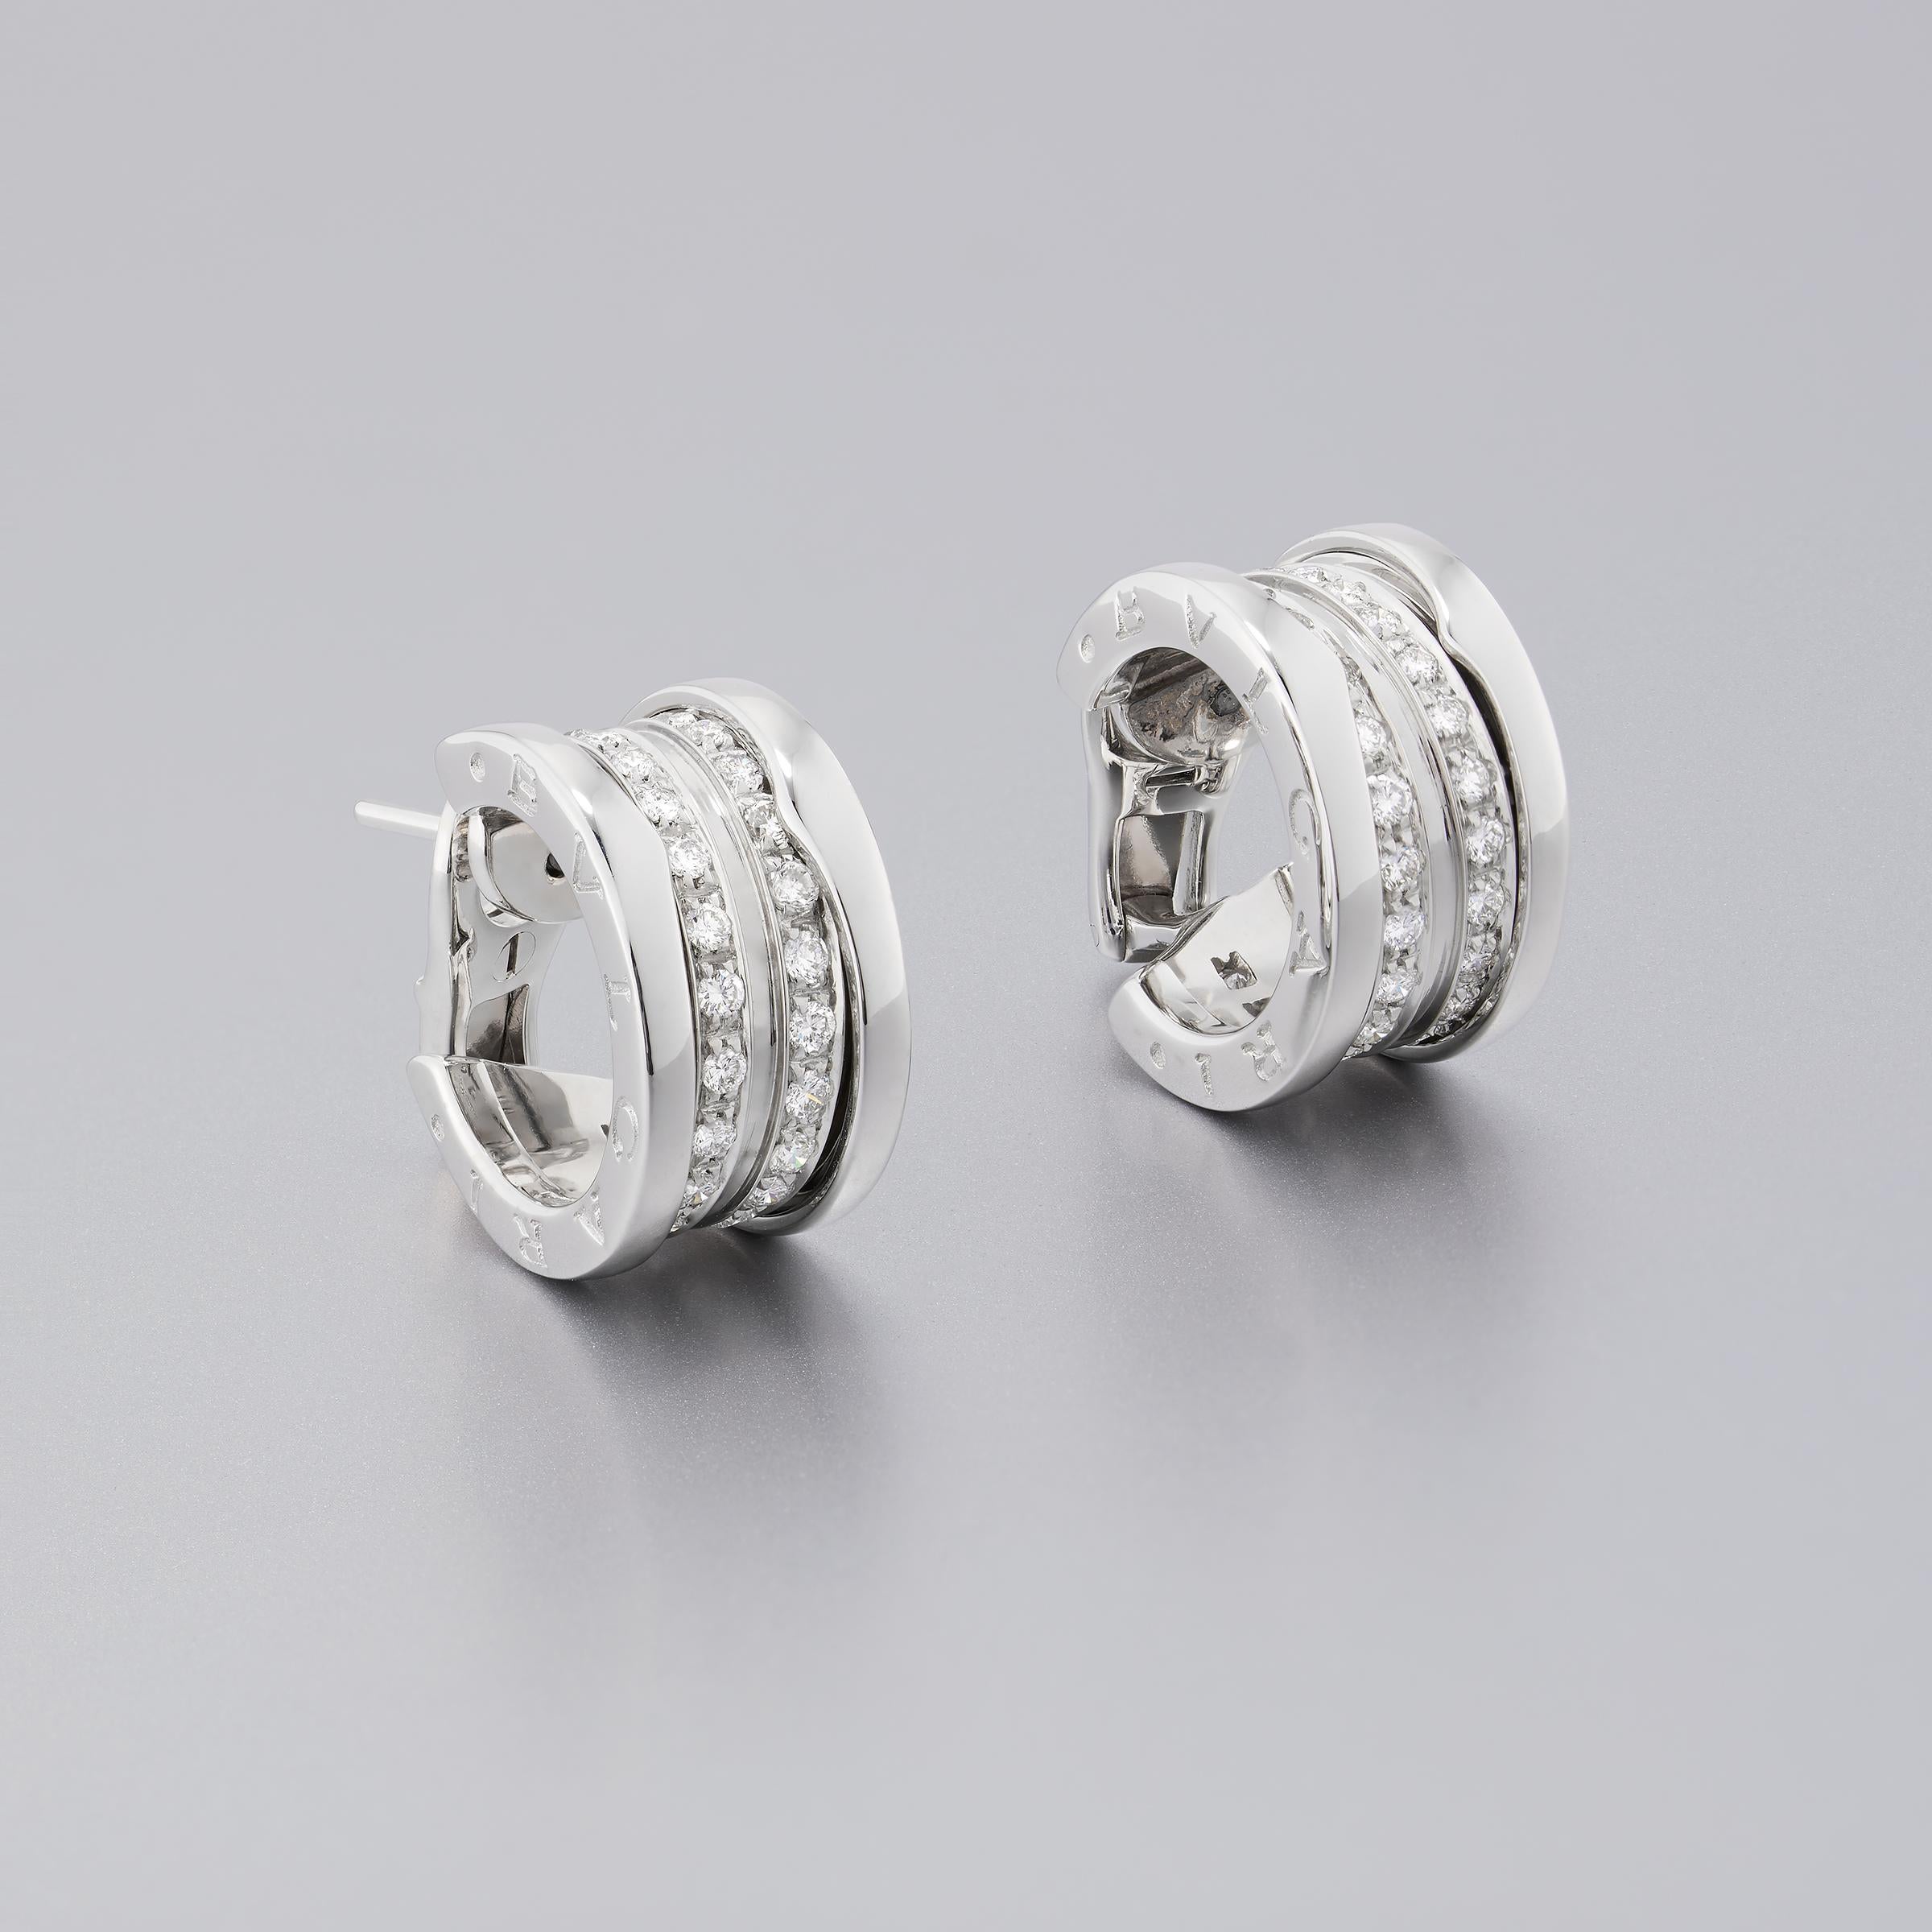 Stylish Bulgari diamond hoop / huggie earrings from iconic B.Zero1 collection that embodies Bulgari’s pioneering creative vision. The earrings sparkle with approximately 1 carat of fine white diamonds (E to F color, VVS to VS clarity) set in